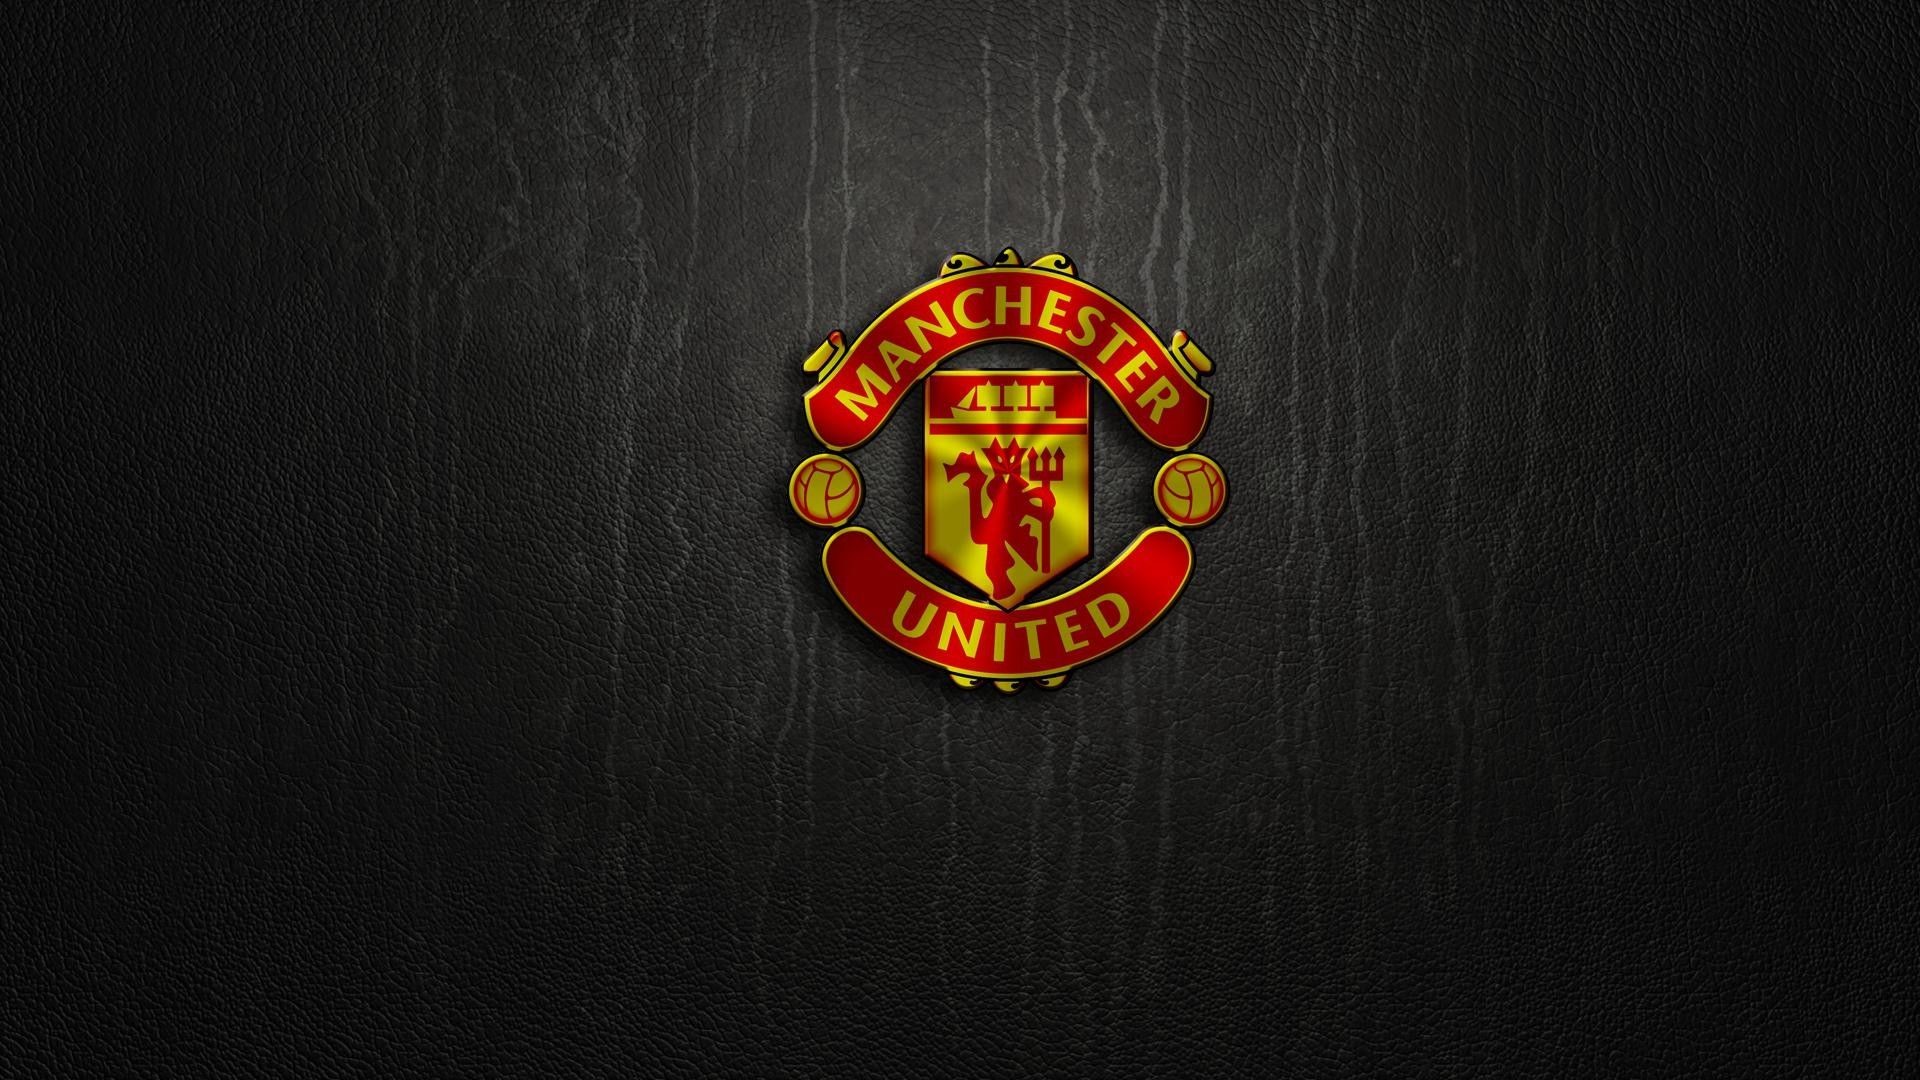 670x1191 Manchester United 2022 18 Away Phone Wallpaper V1 By Jgfx Designs On Quot Gt 1920x1080